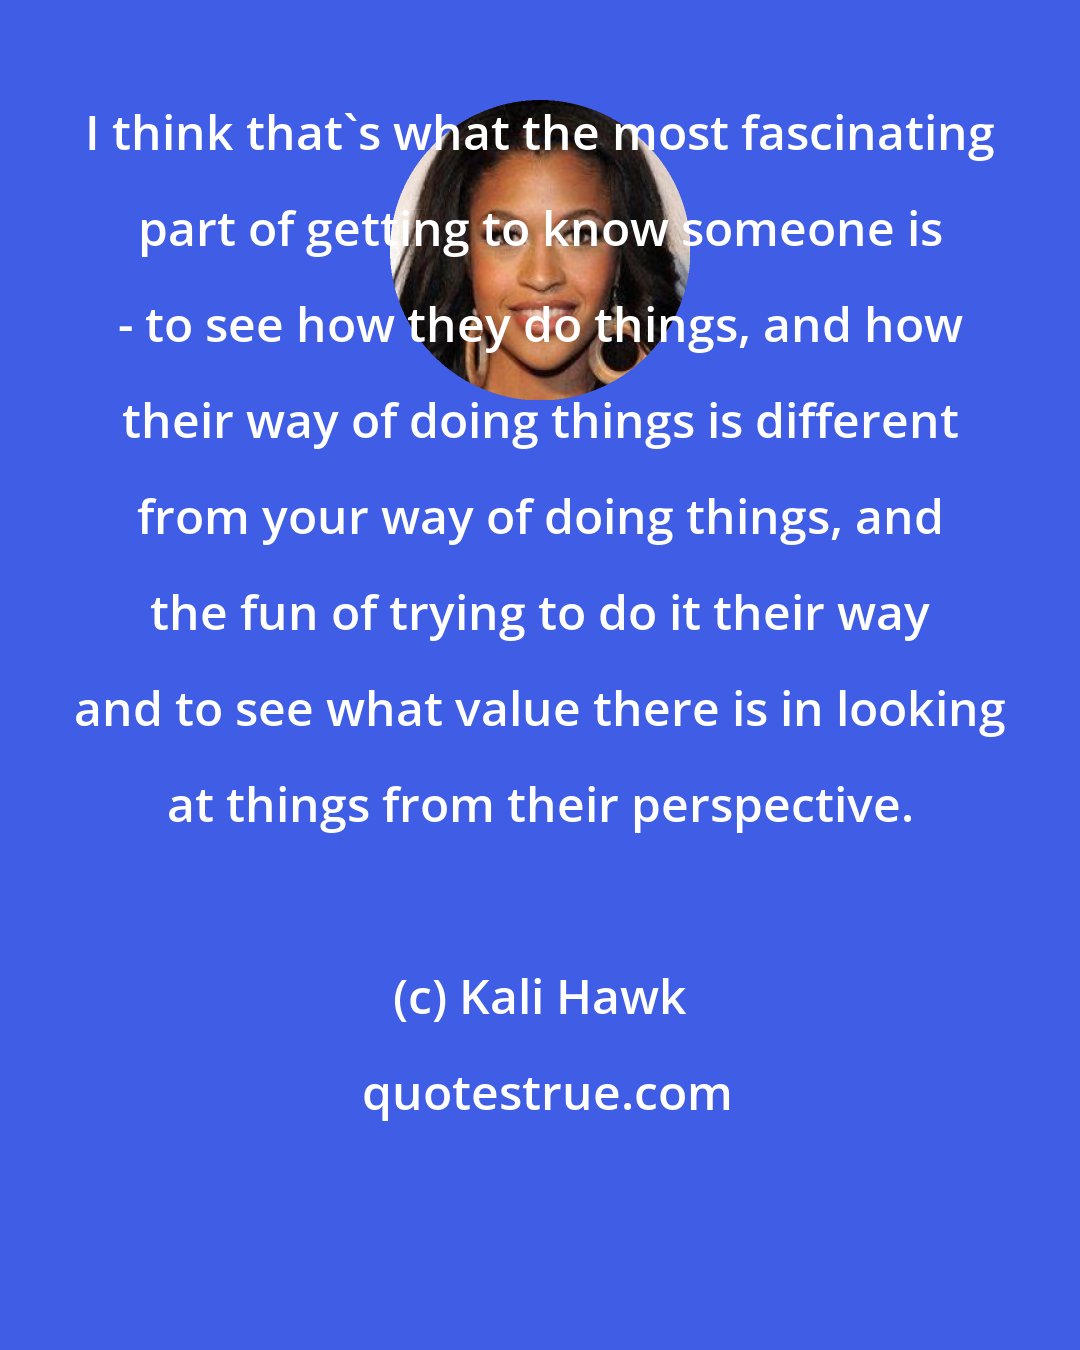 Kali Hawk: I think that's what the most fascinating part of getting to know someone is - to see how they do things, and how their way of doing things is different from your way of doing things, and the fun of trying to do it their way and to see what value there is in looking at things from their perspective.